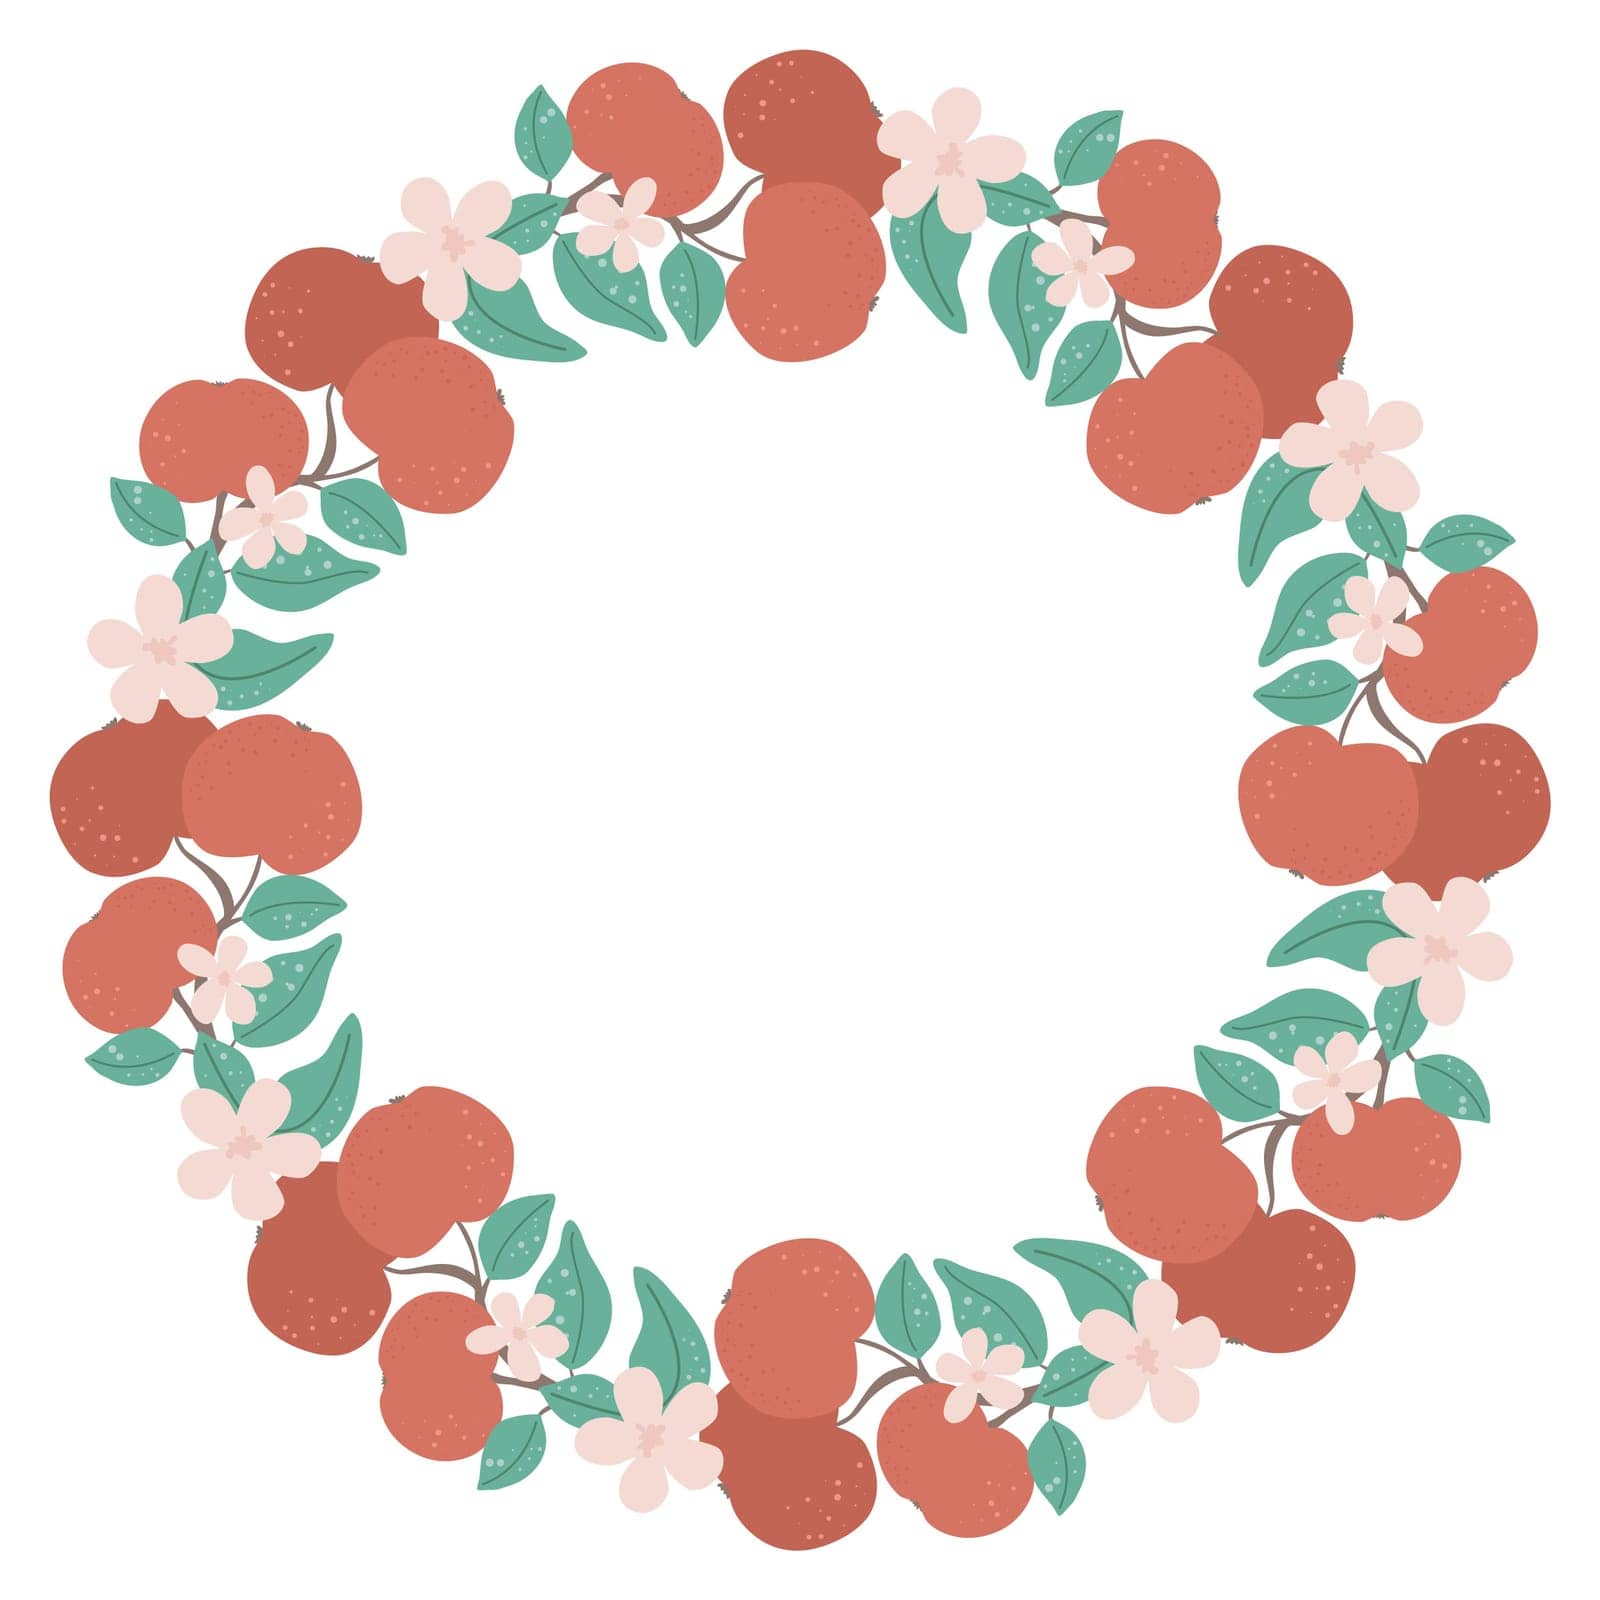 Flowering branches with apples round frame. Circular rim with ripe fruits, flowers and leaves. Fruit ornament with copy space, vector illustration